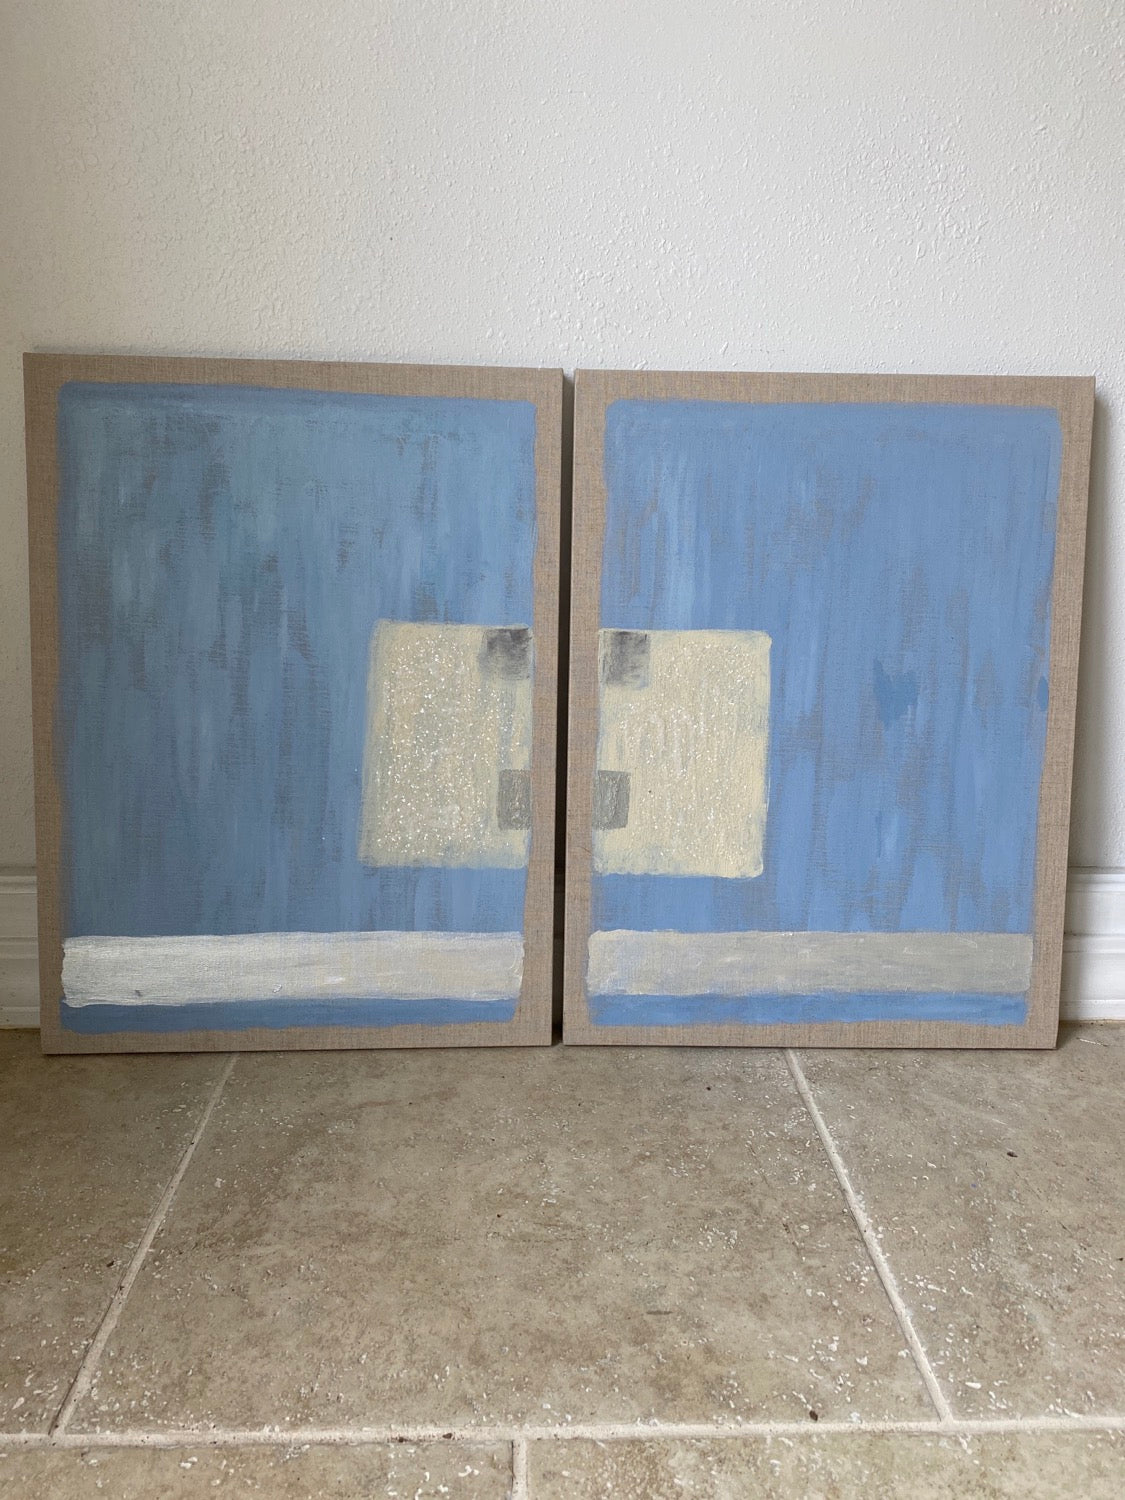 Pair of 18x24 original abstracts on linen canvas by Dawn Lensing